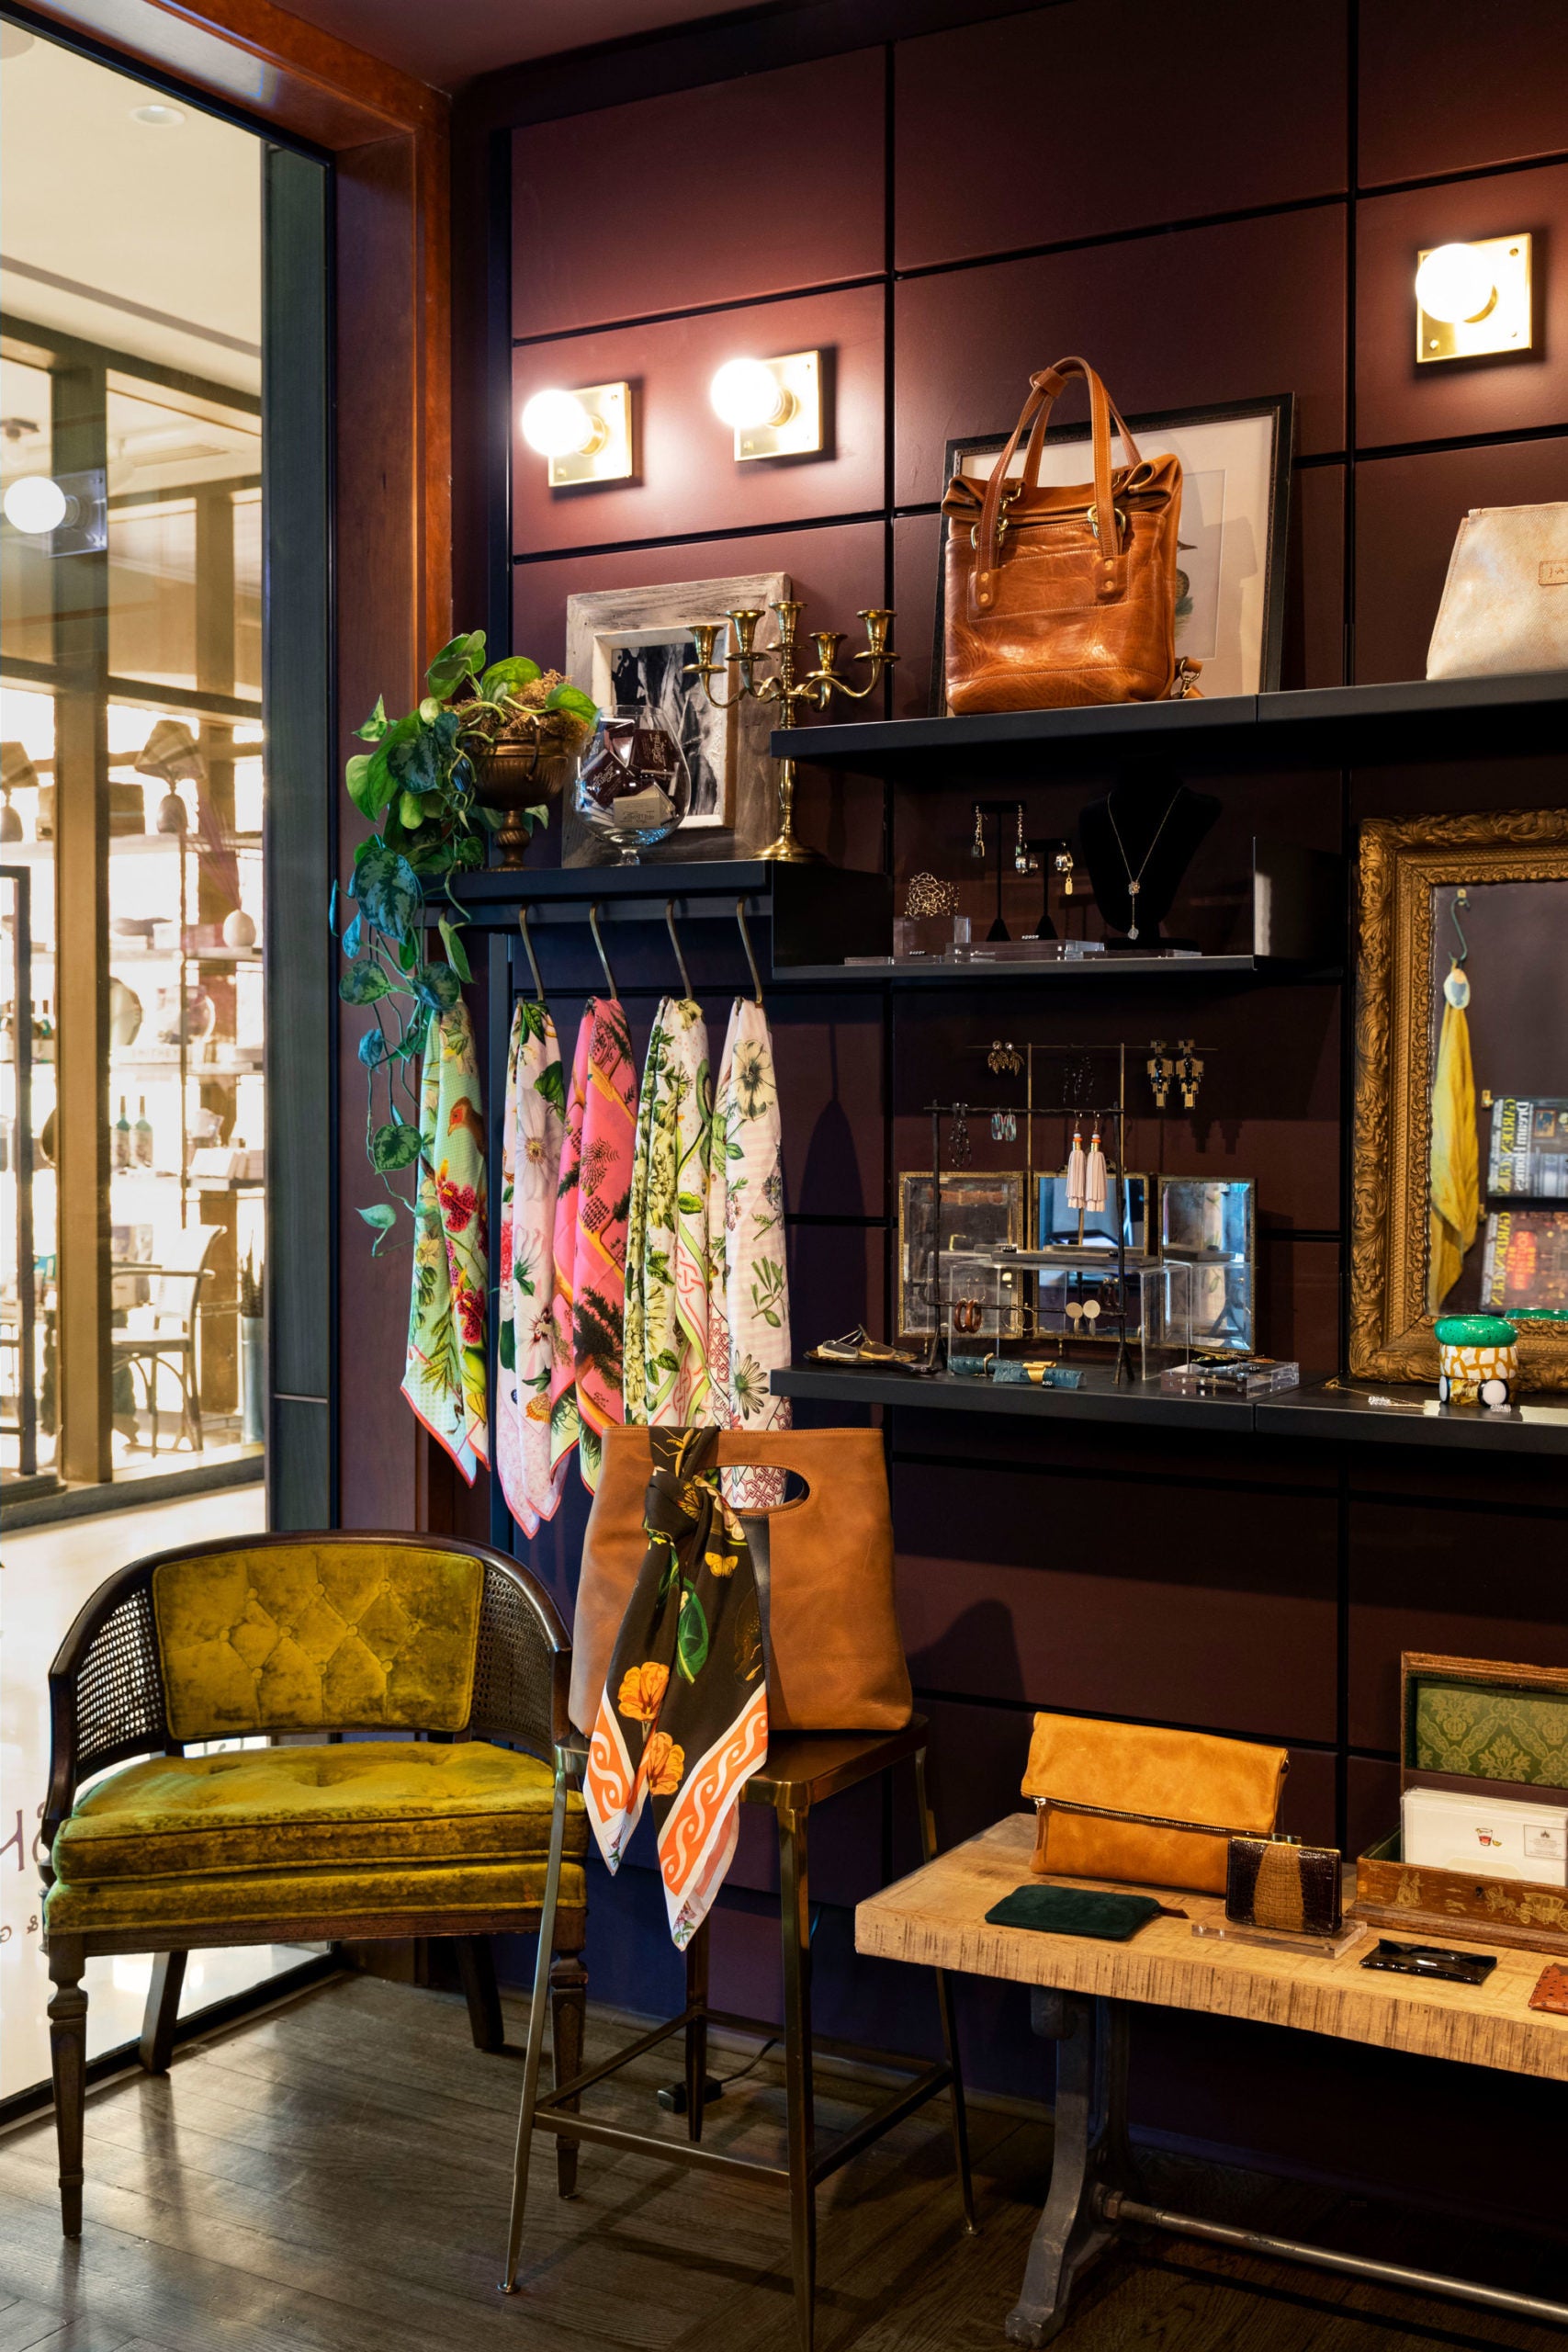 An elegant boutique interior with a vintage aesthetic, featuring a display shelf with bags and accessories, framed artworks, and a cozy seating area with a plush green chair.